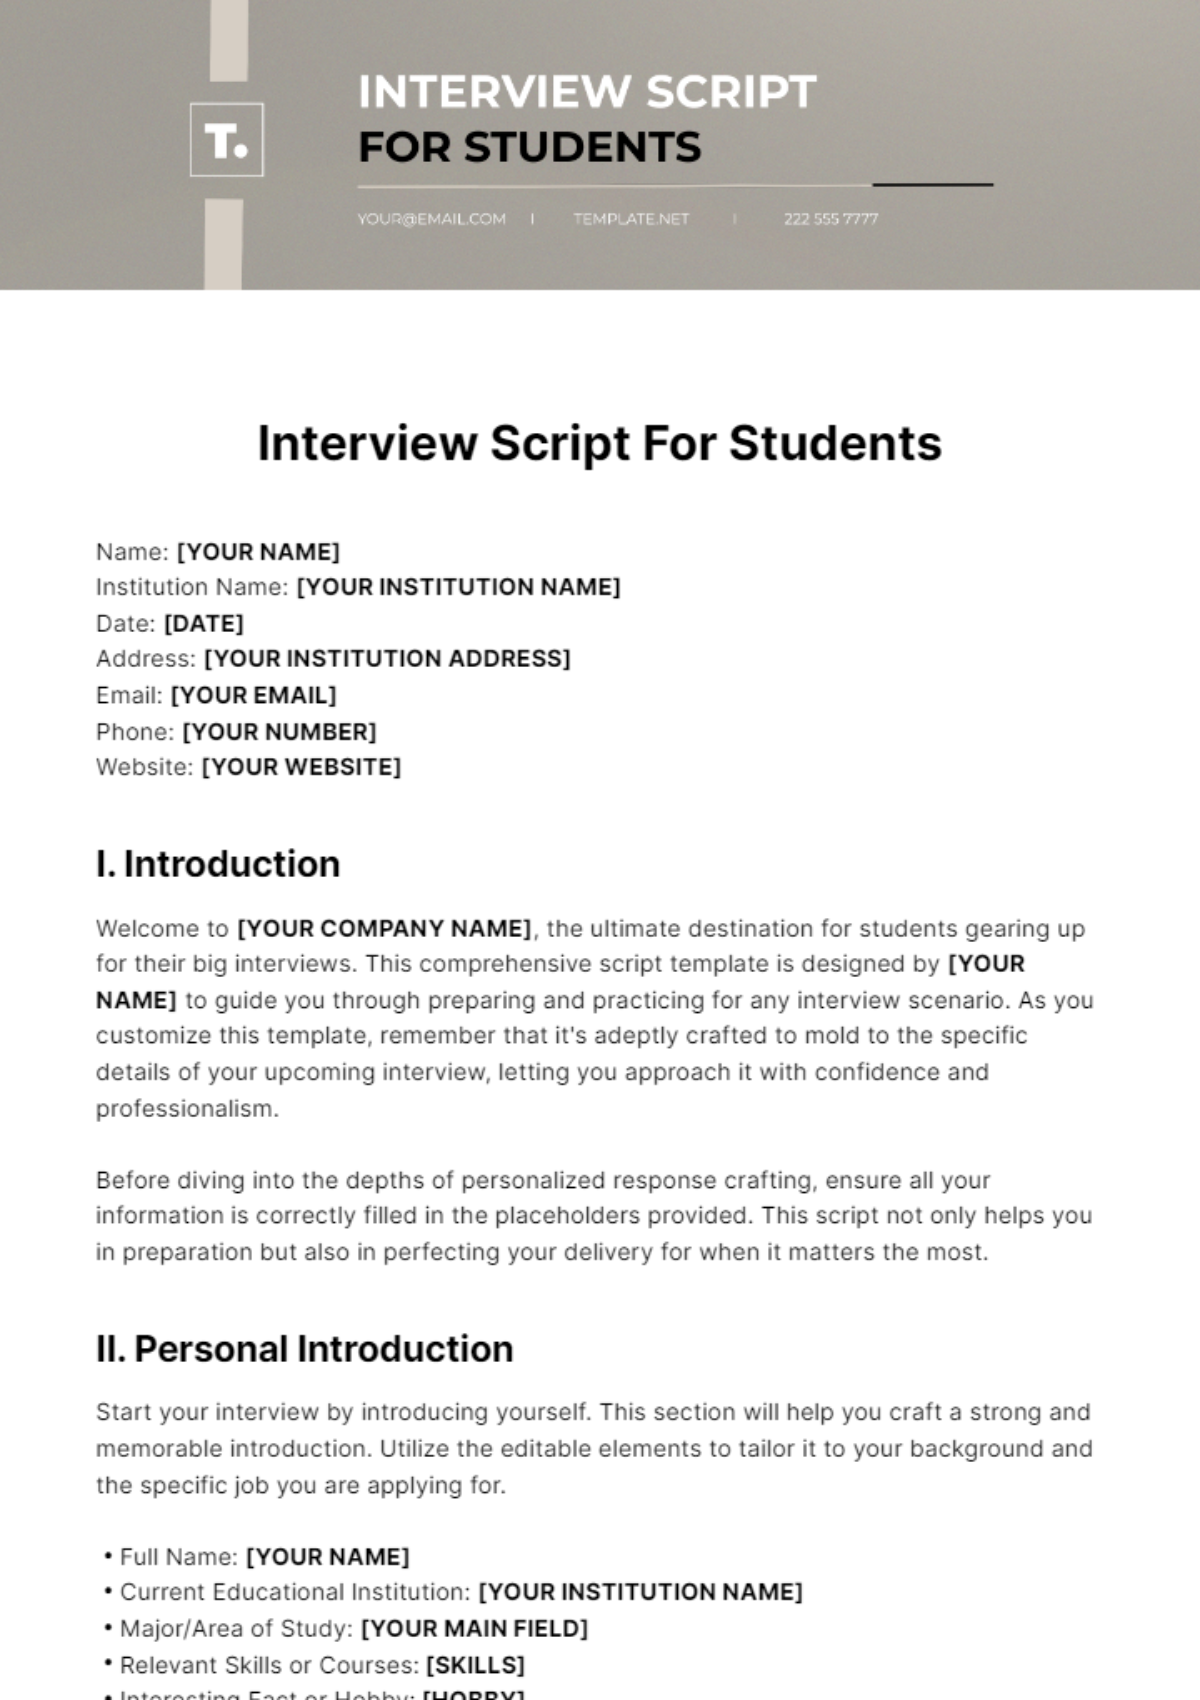 Free Interview Script For Students Template